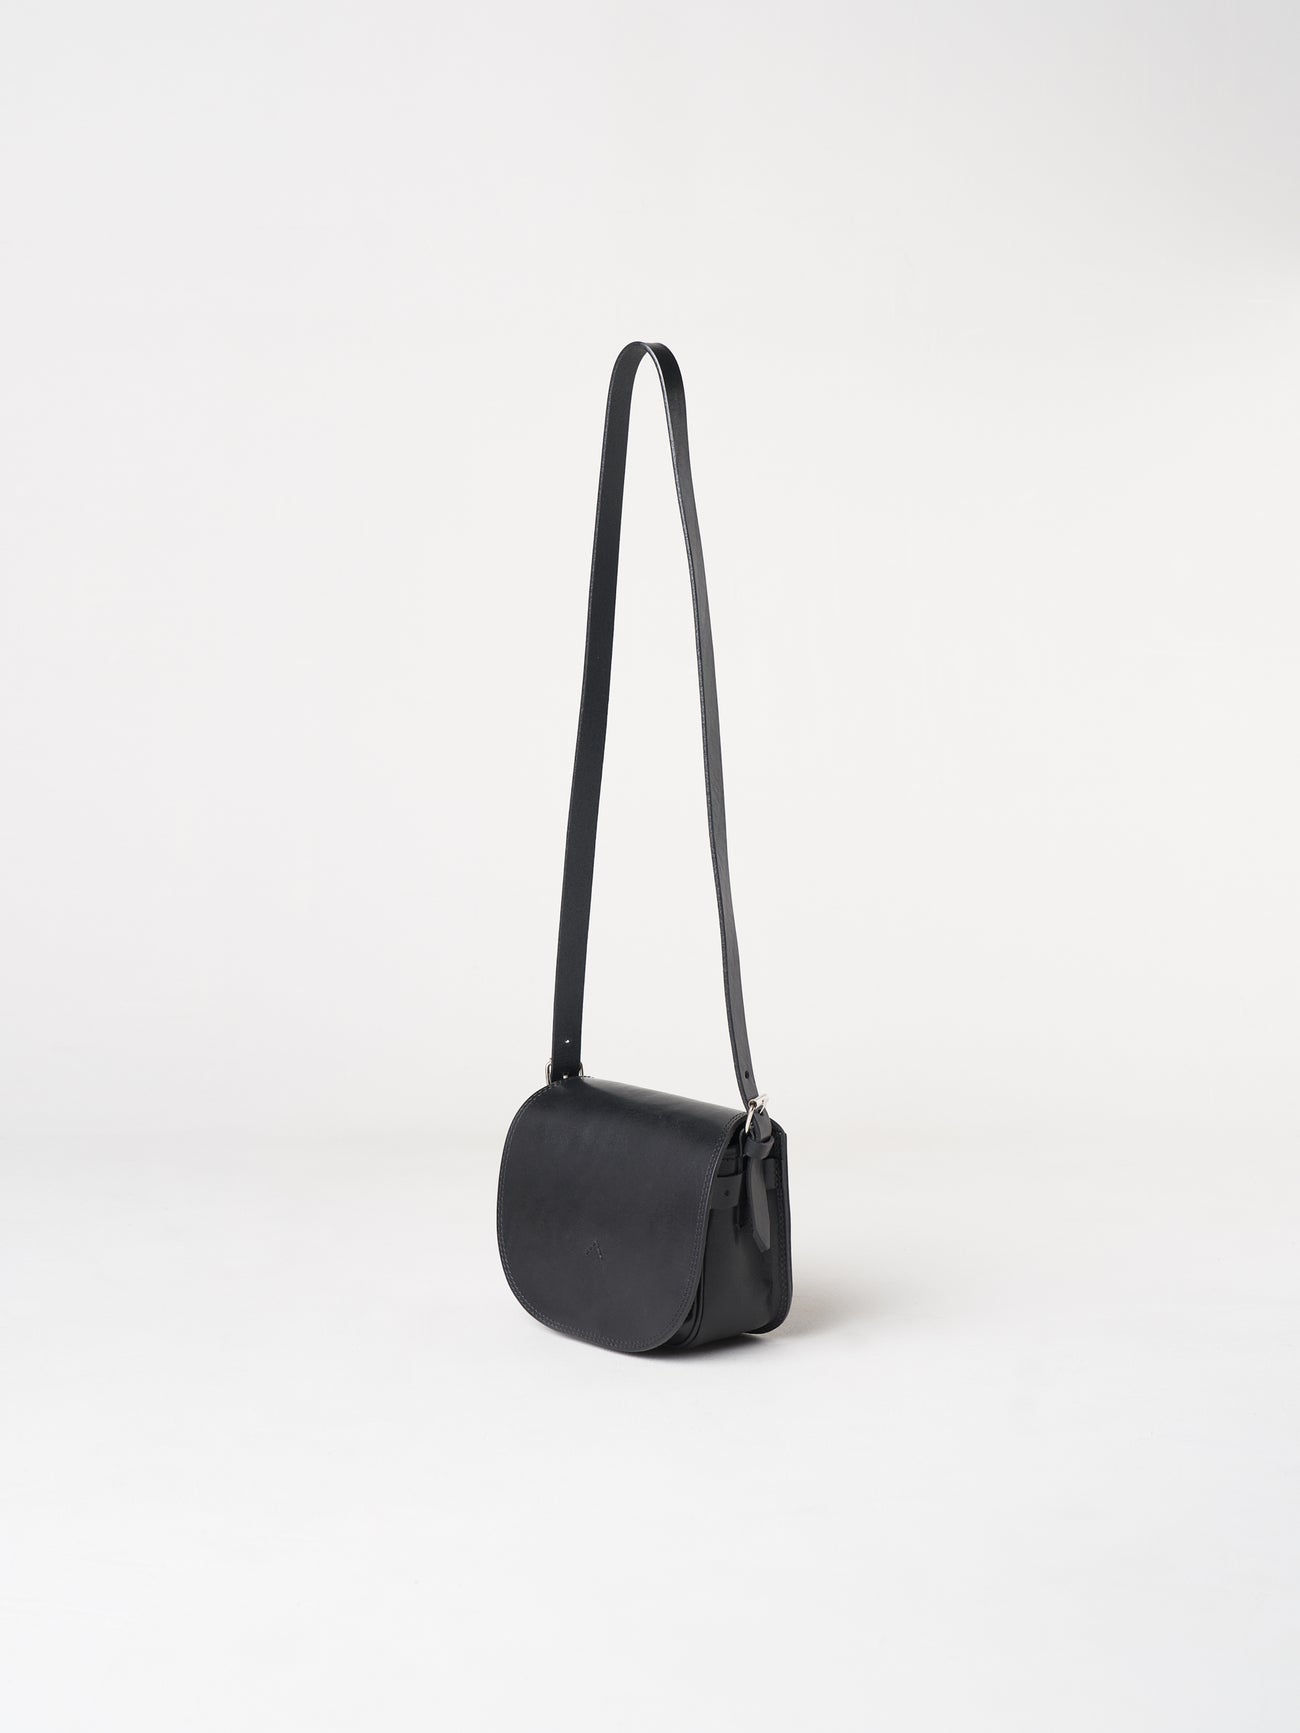 Want the Stella McCartney Falabella bag look for less? - Pookie Womenswear  % %